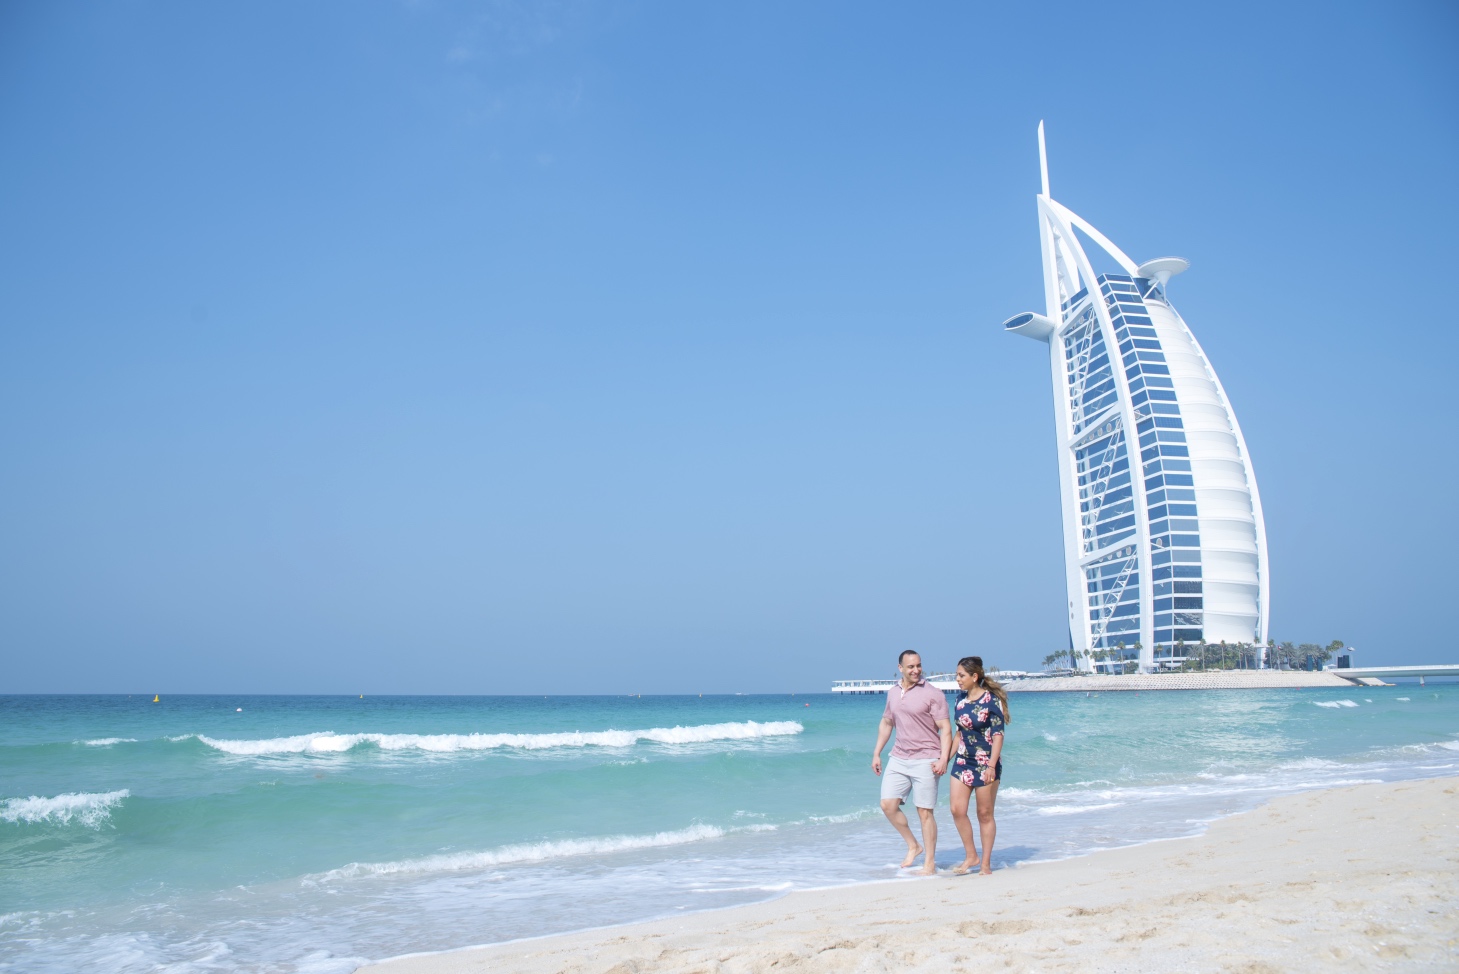 a man and woman standing on a beach with a tall building in the background